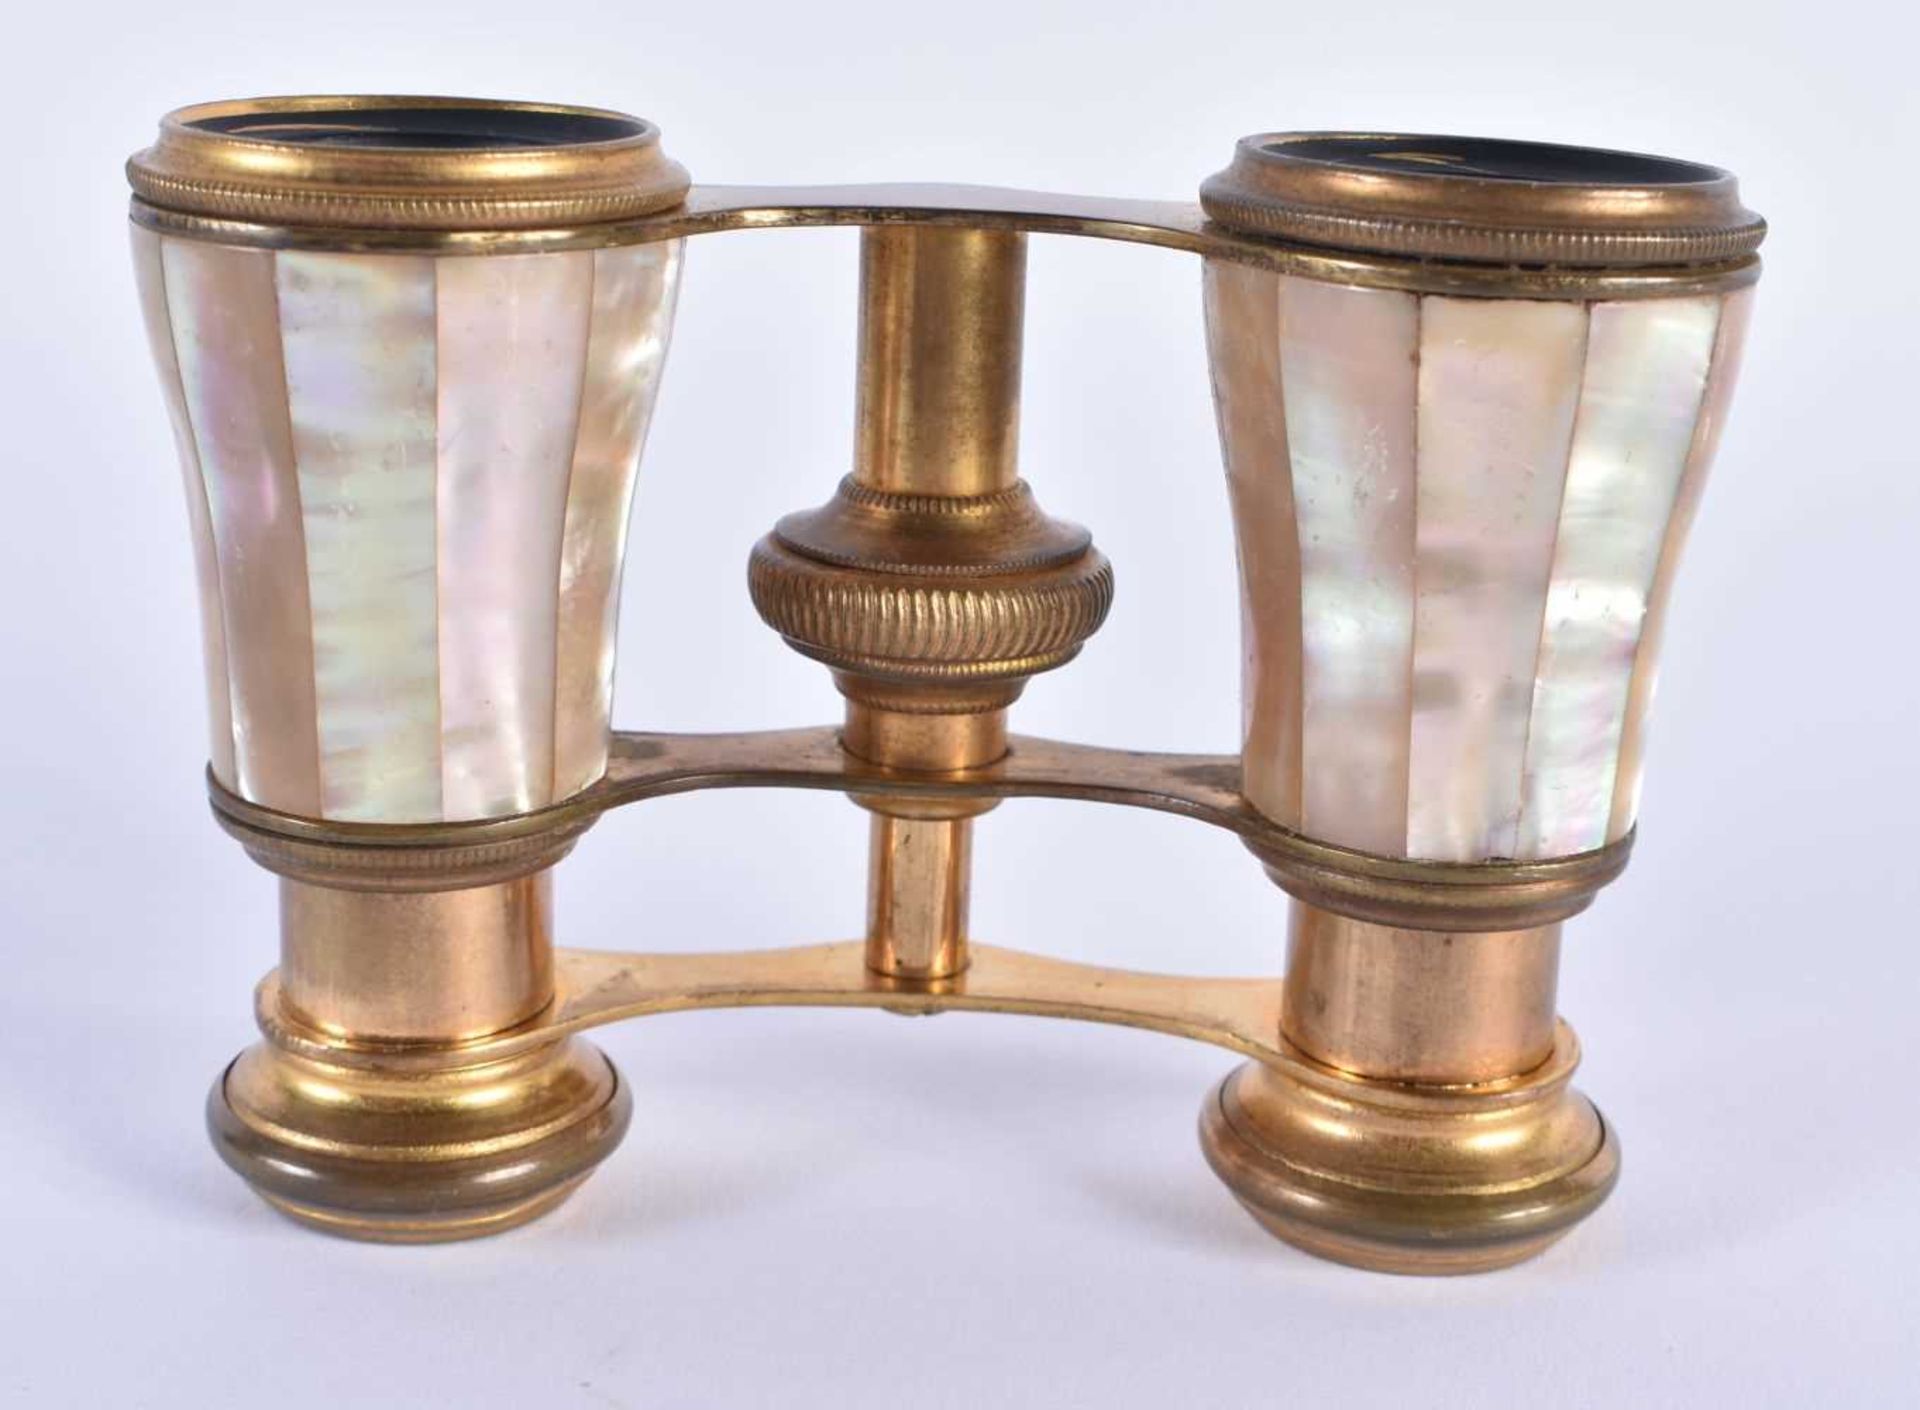 A PAIR OF MOTHER OF PEARL OPERA GLASSES. 9 cm x 8 cm extended. - Image 3 of 4